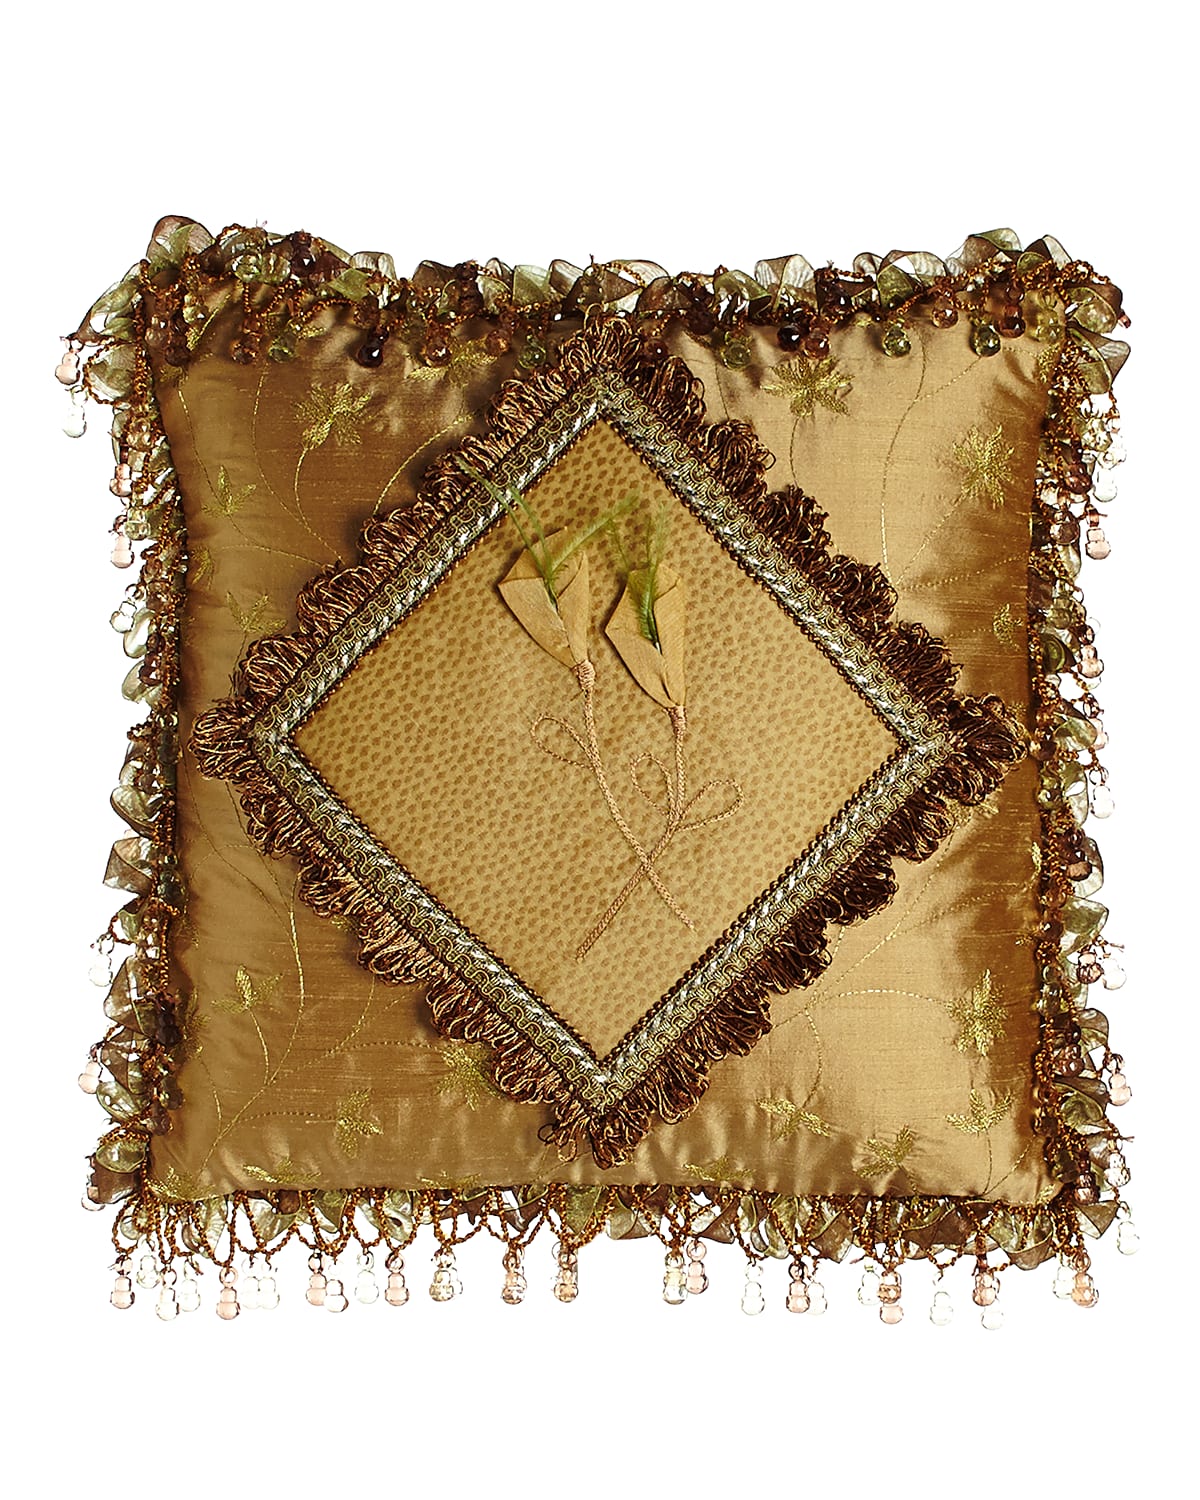 Image Sweet Dreams Diamond-Center Pillow with Dimensional Flowers & Ribbon & Bead Fringe, 14"Sq.